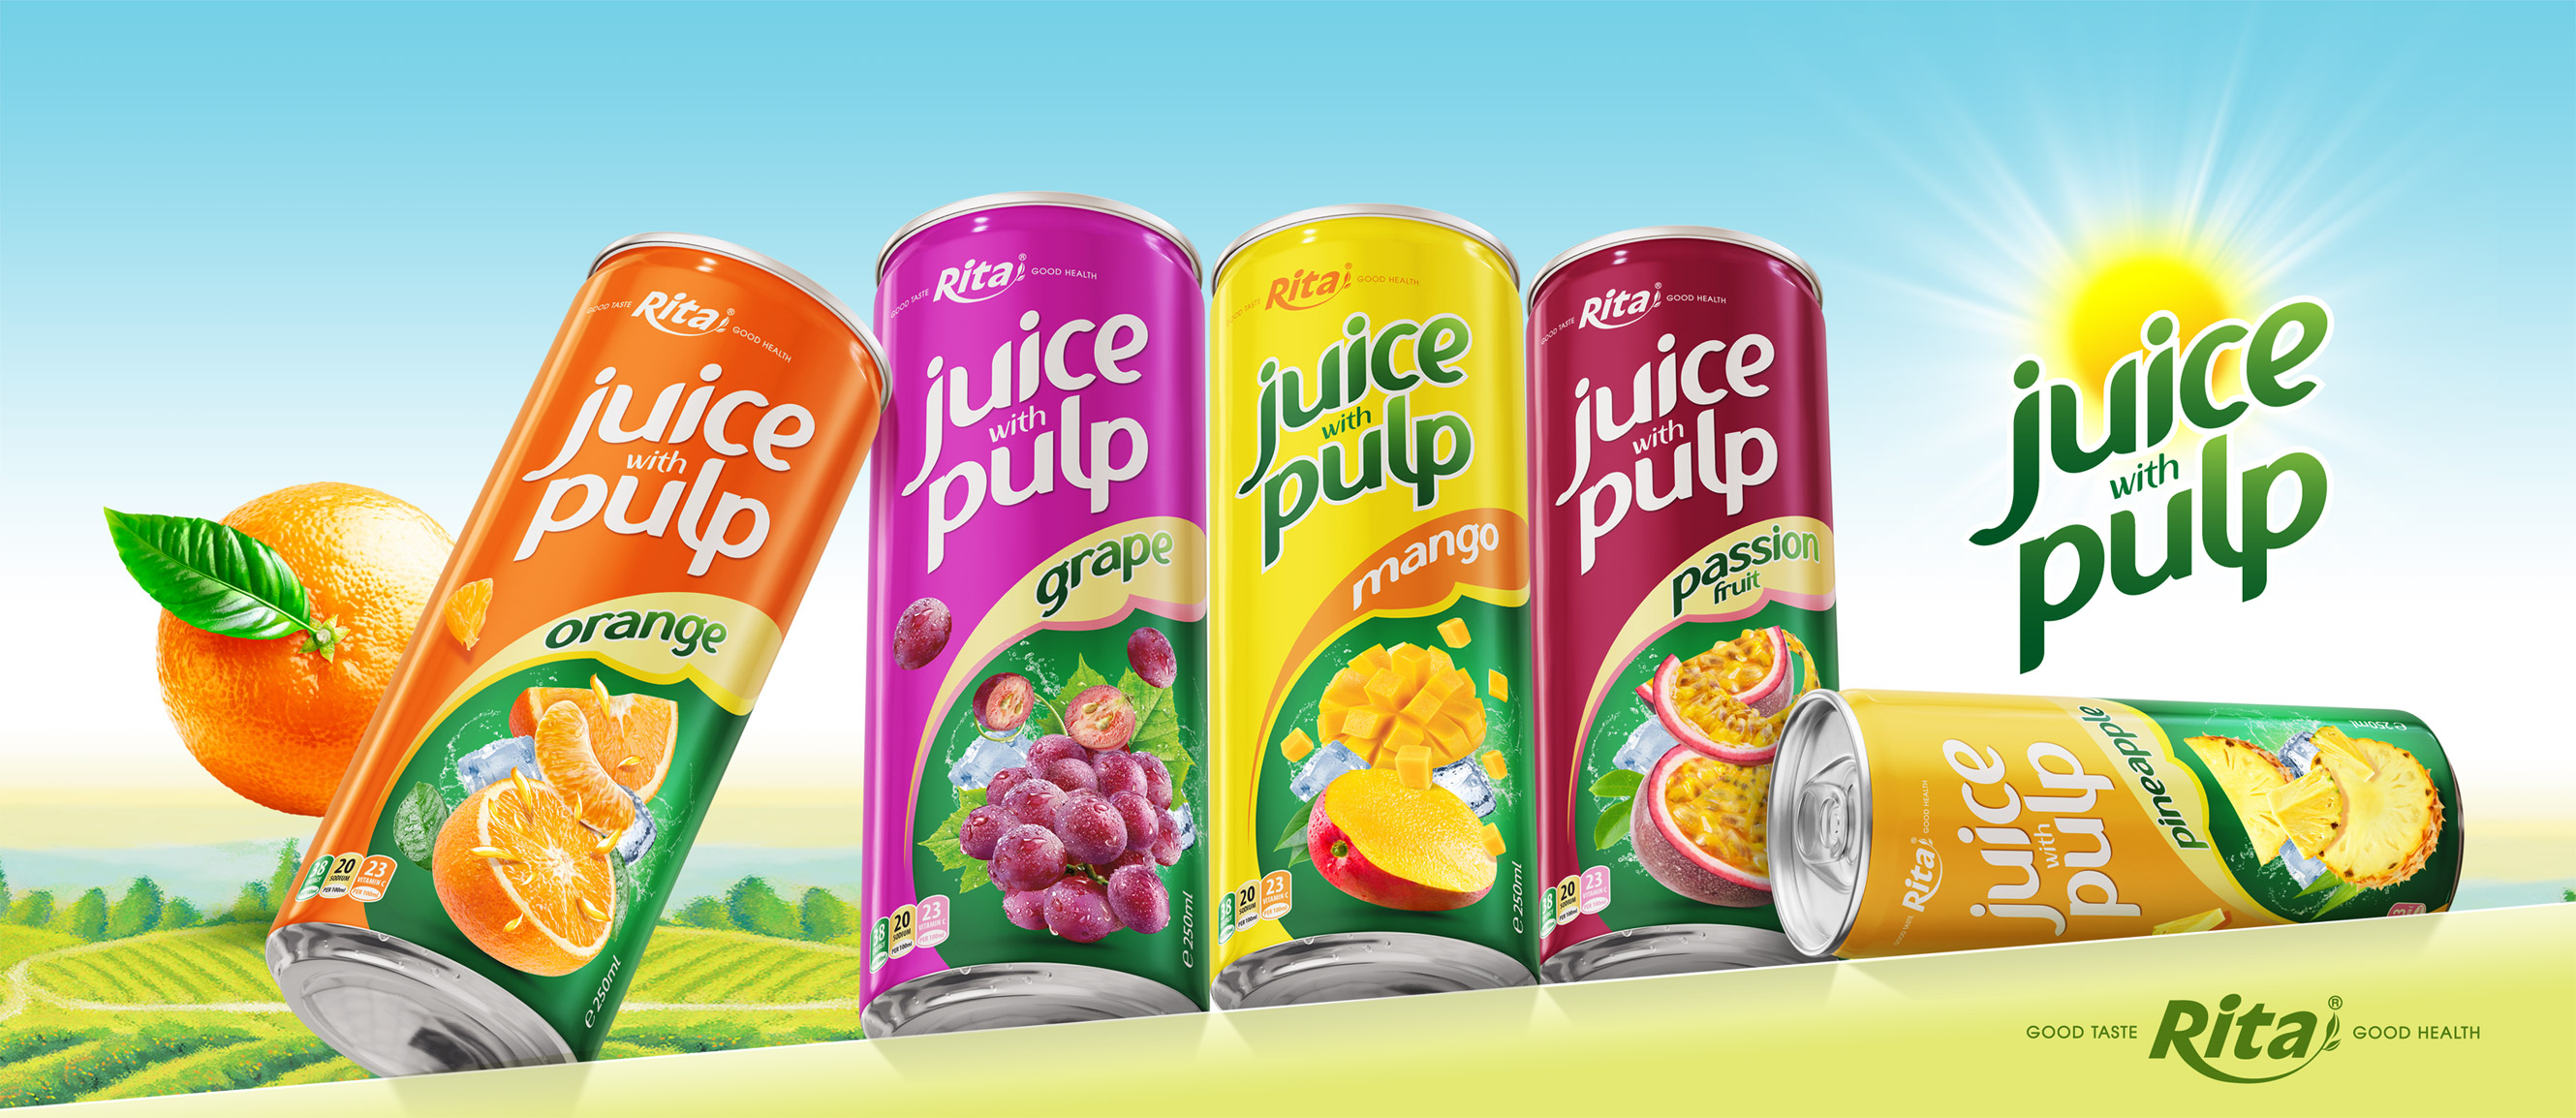 design juice with pulp 250ml can